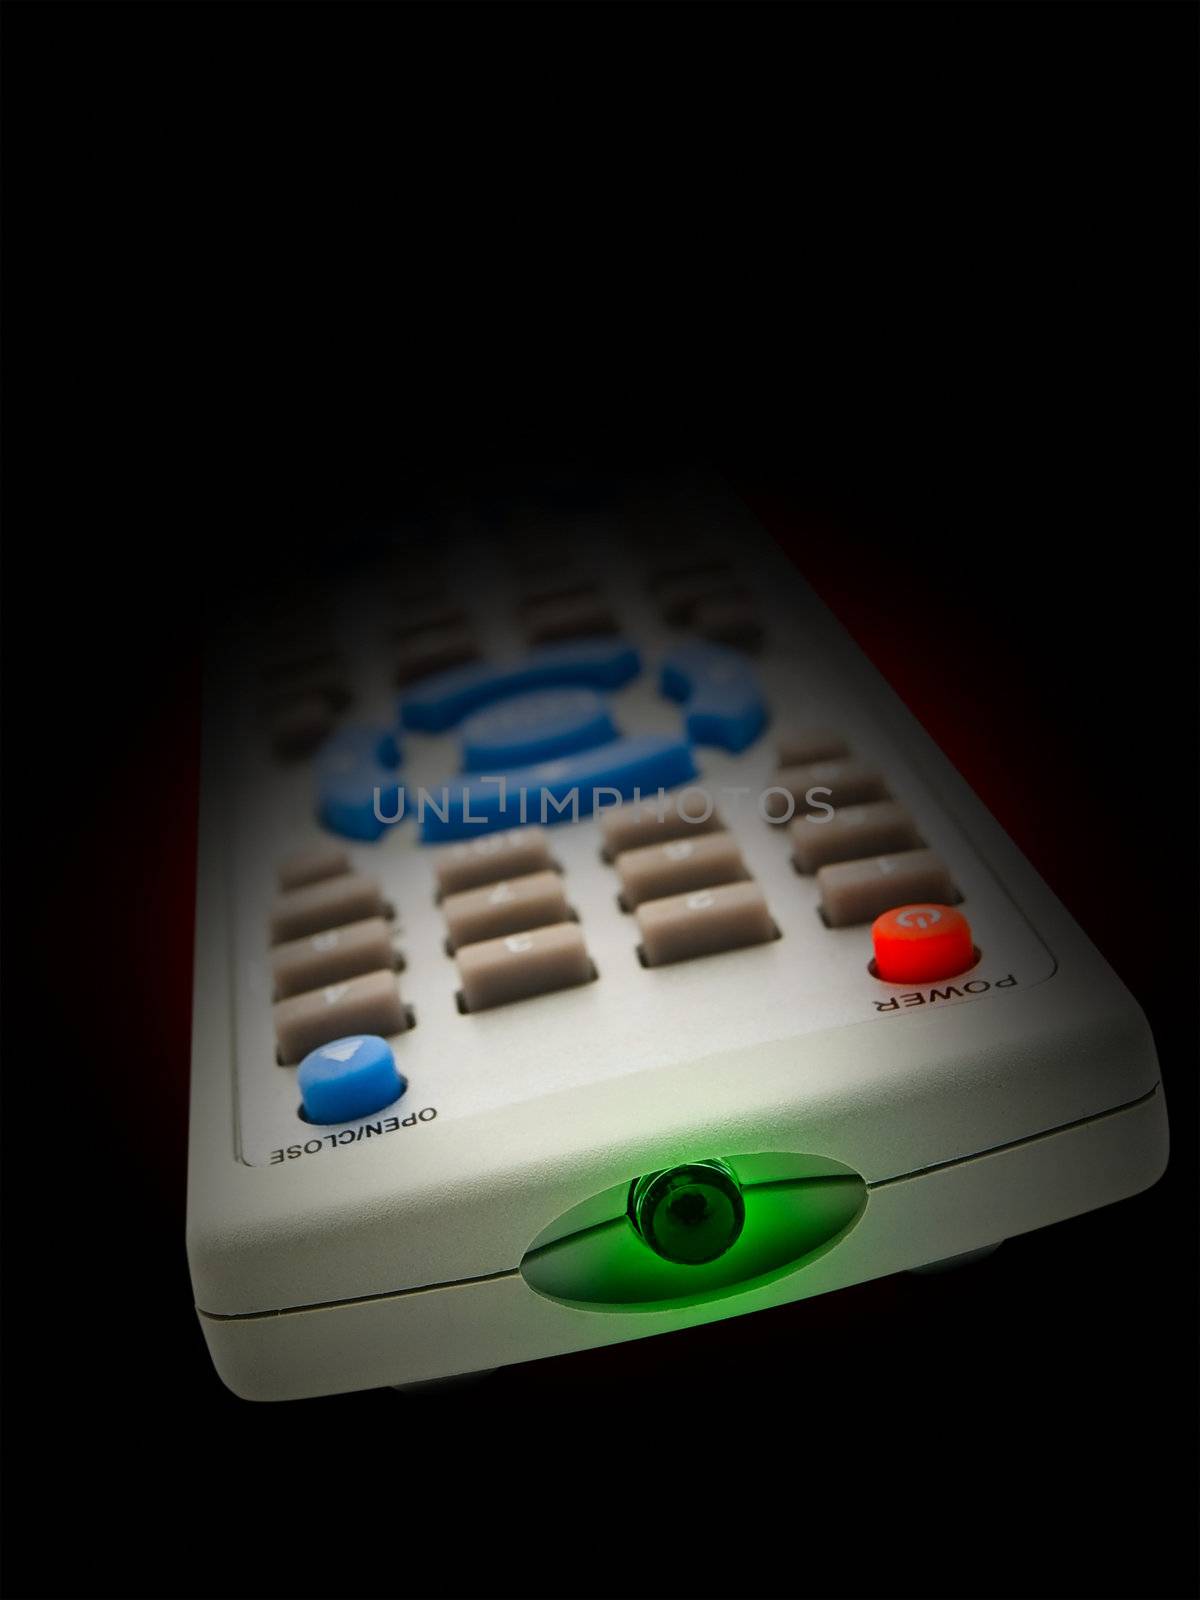 remote control over the black background